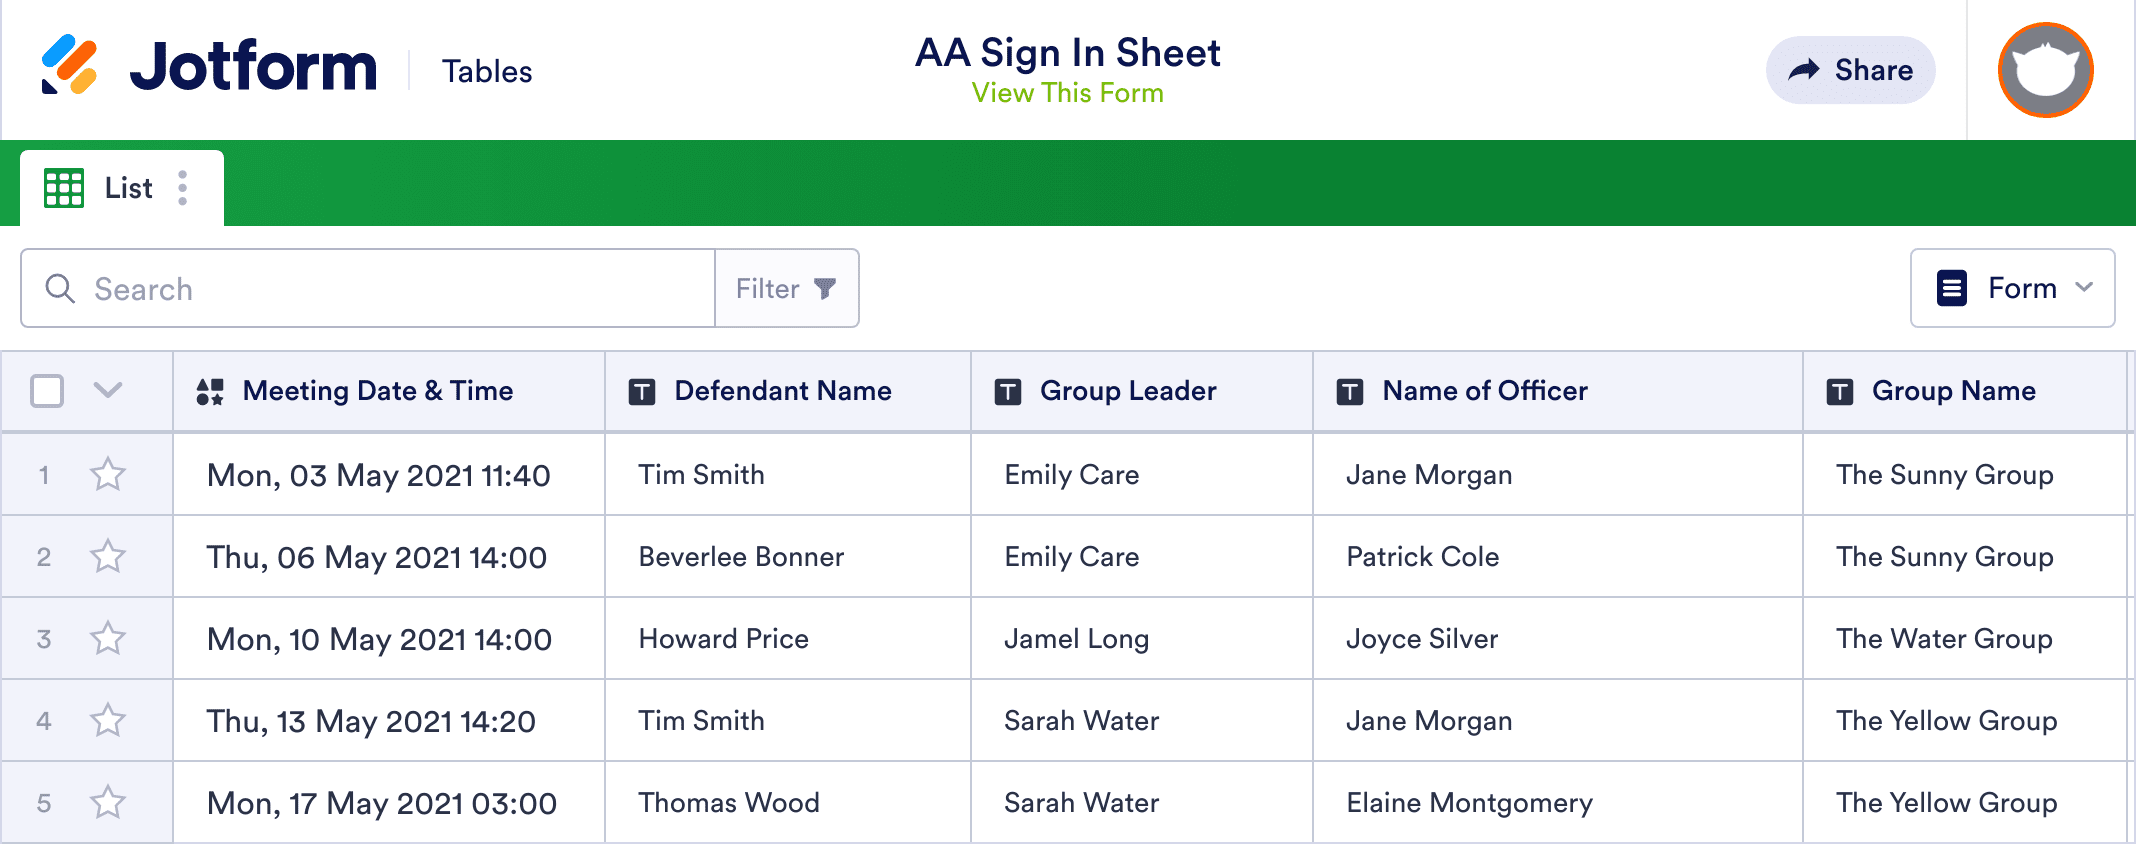 AA Sign In Sheet